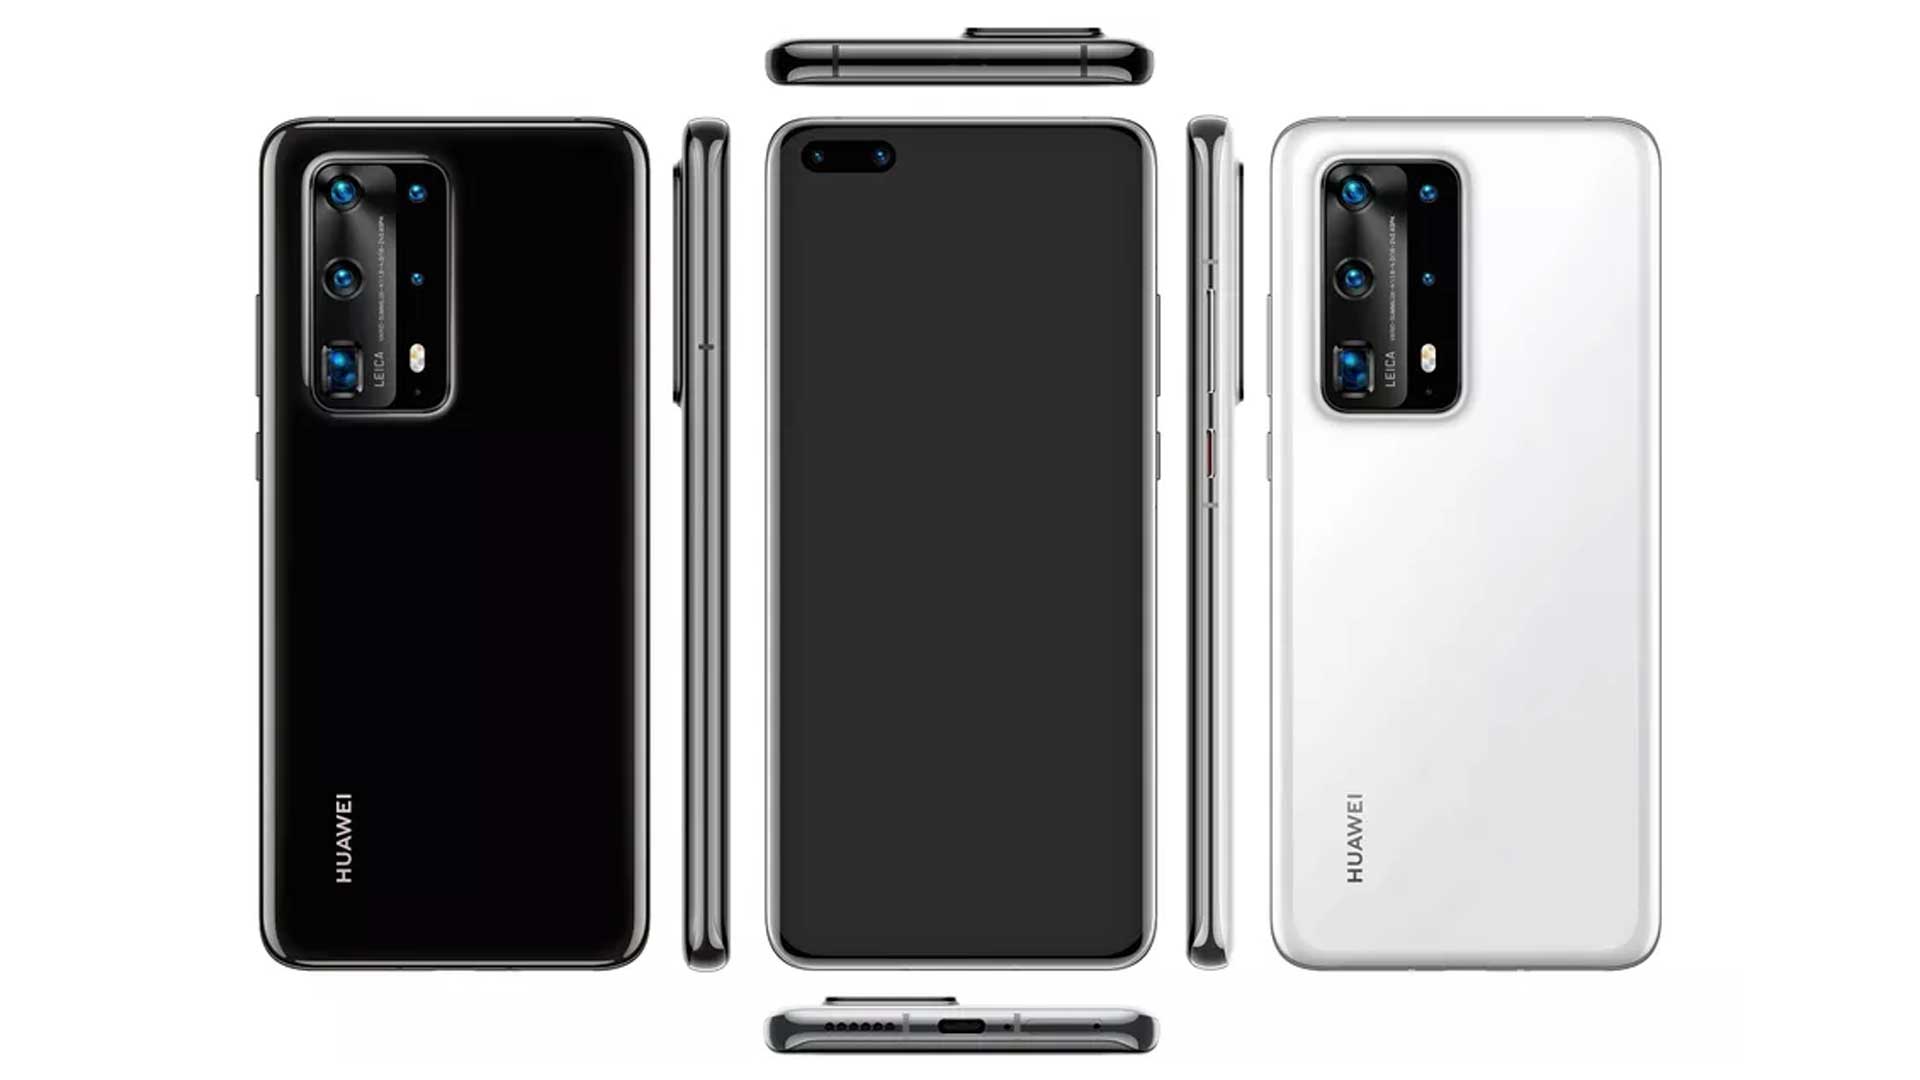 Huawei P40 Pro Leak Reveals Five-Camera System and New Design